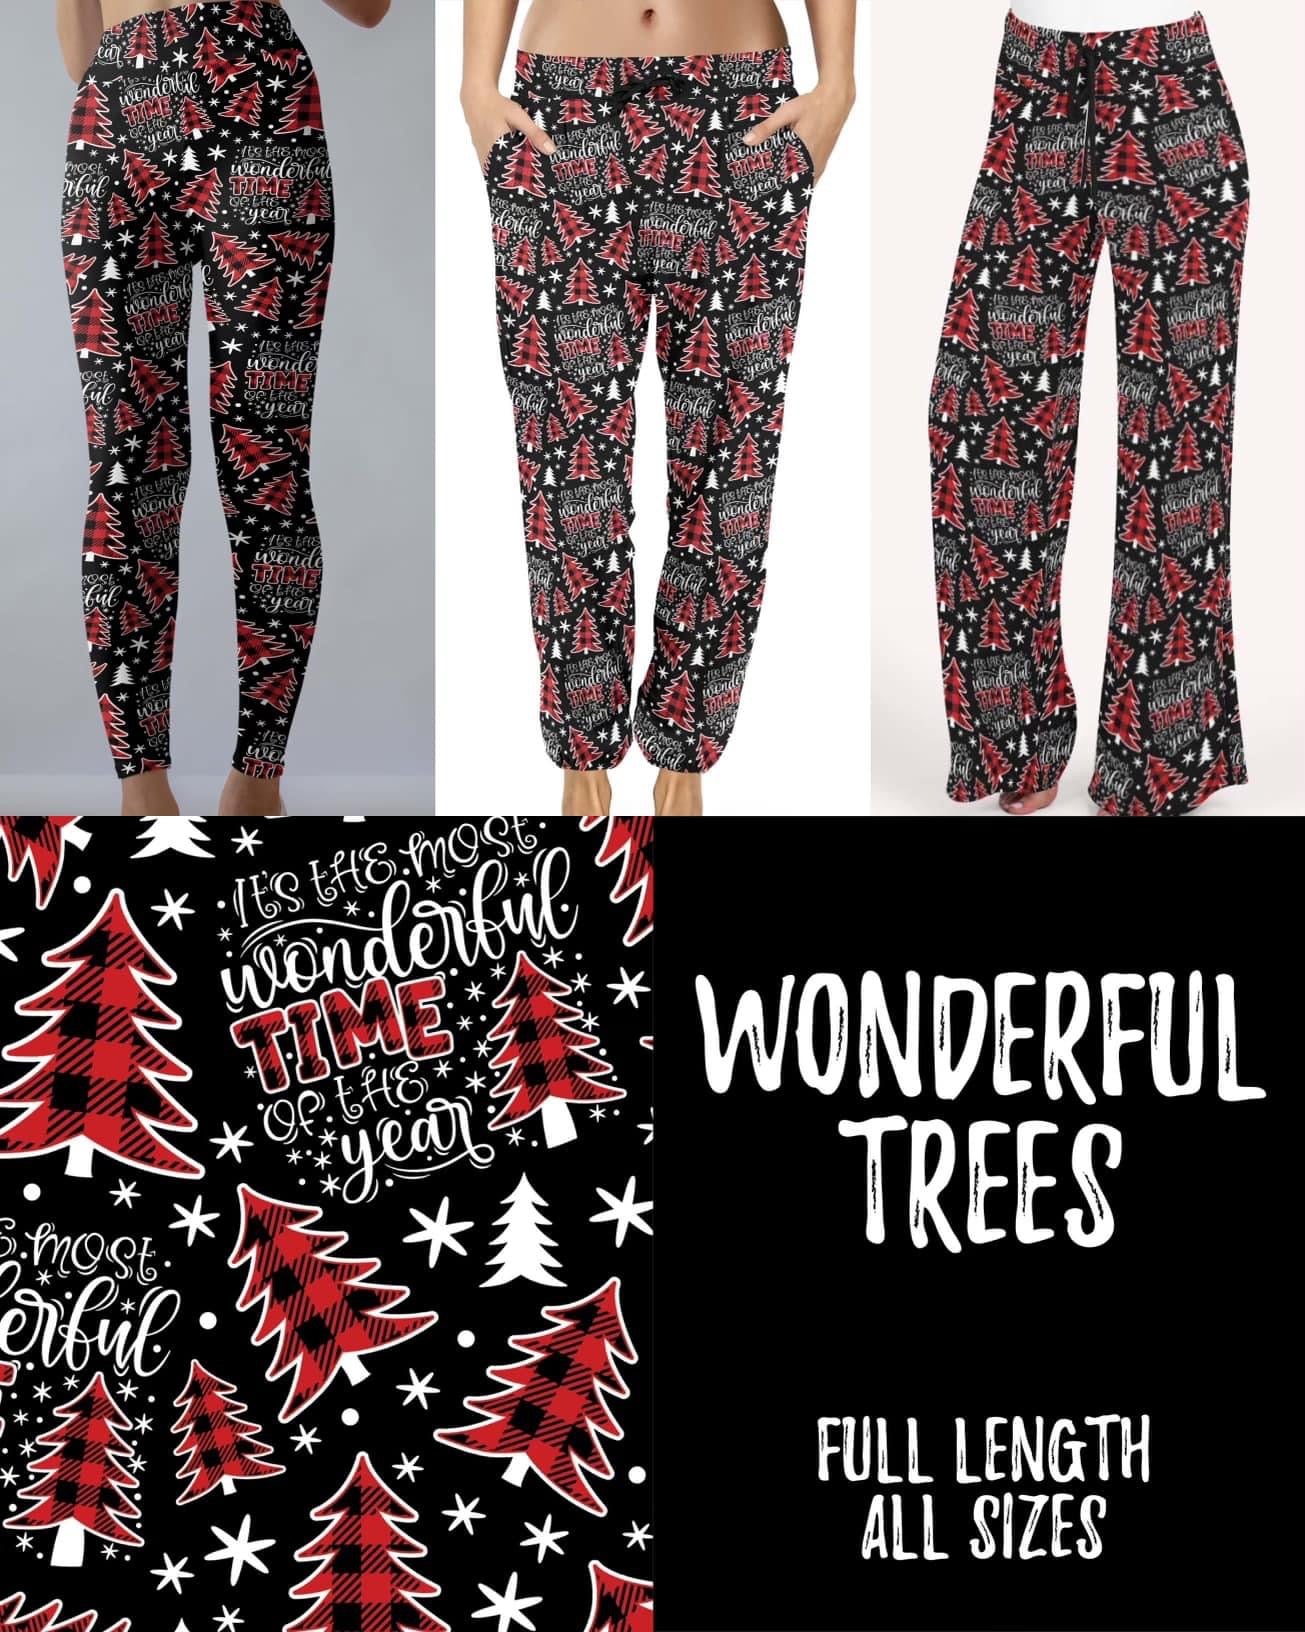 Wonderful Trees Leggings with and without Pockets